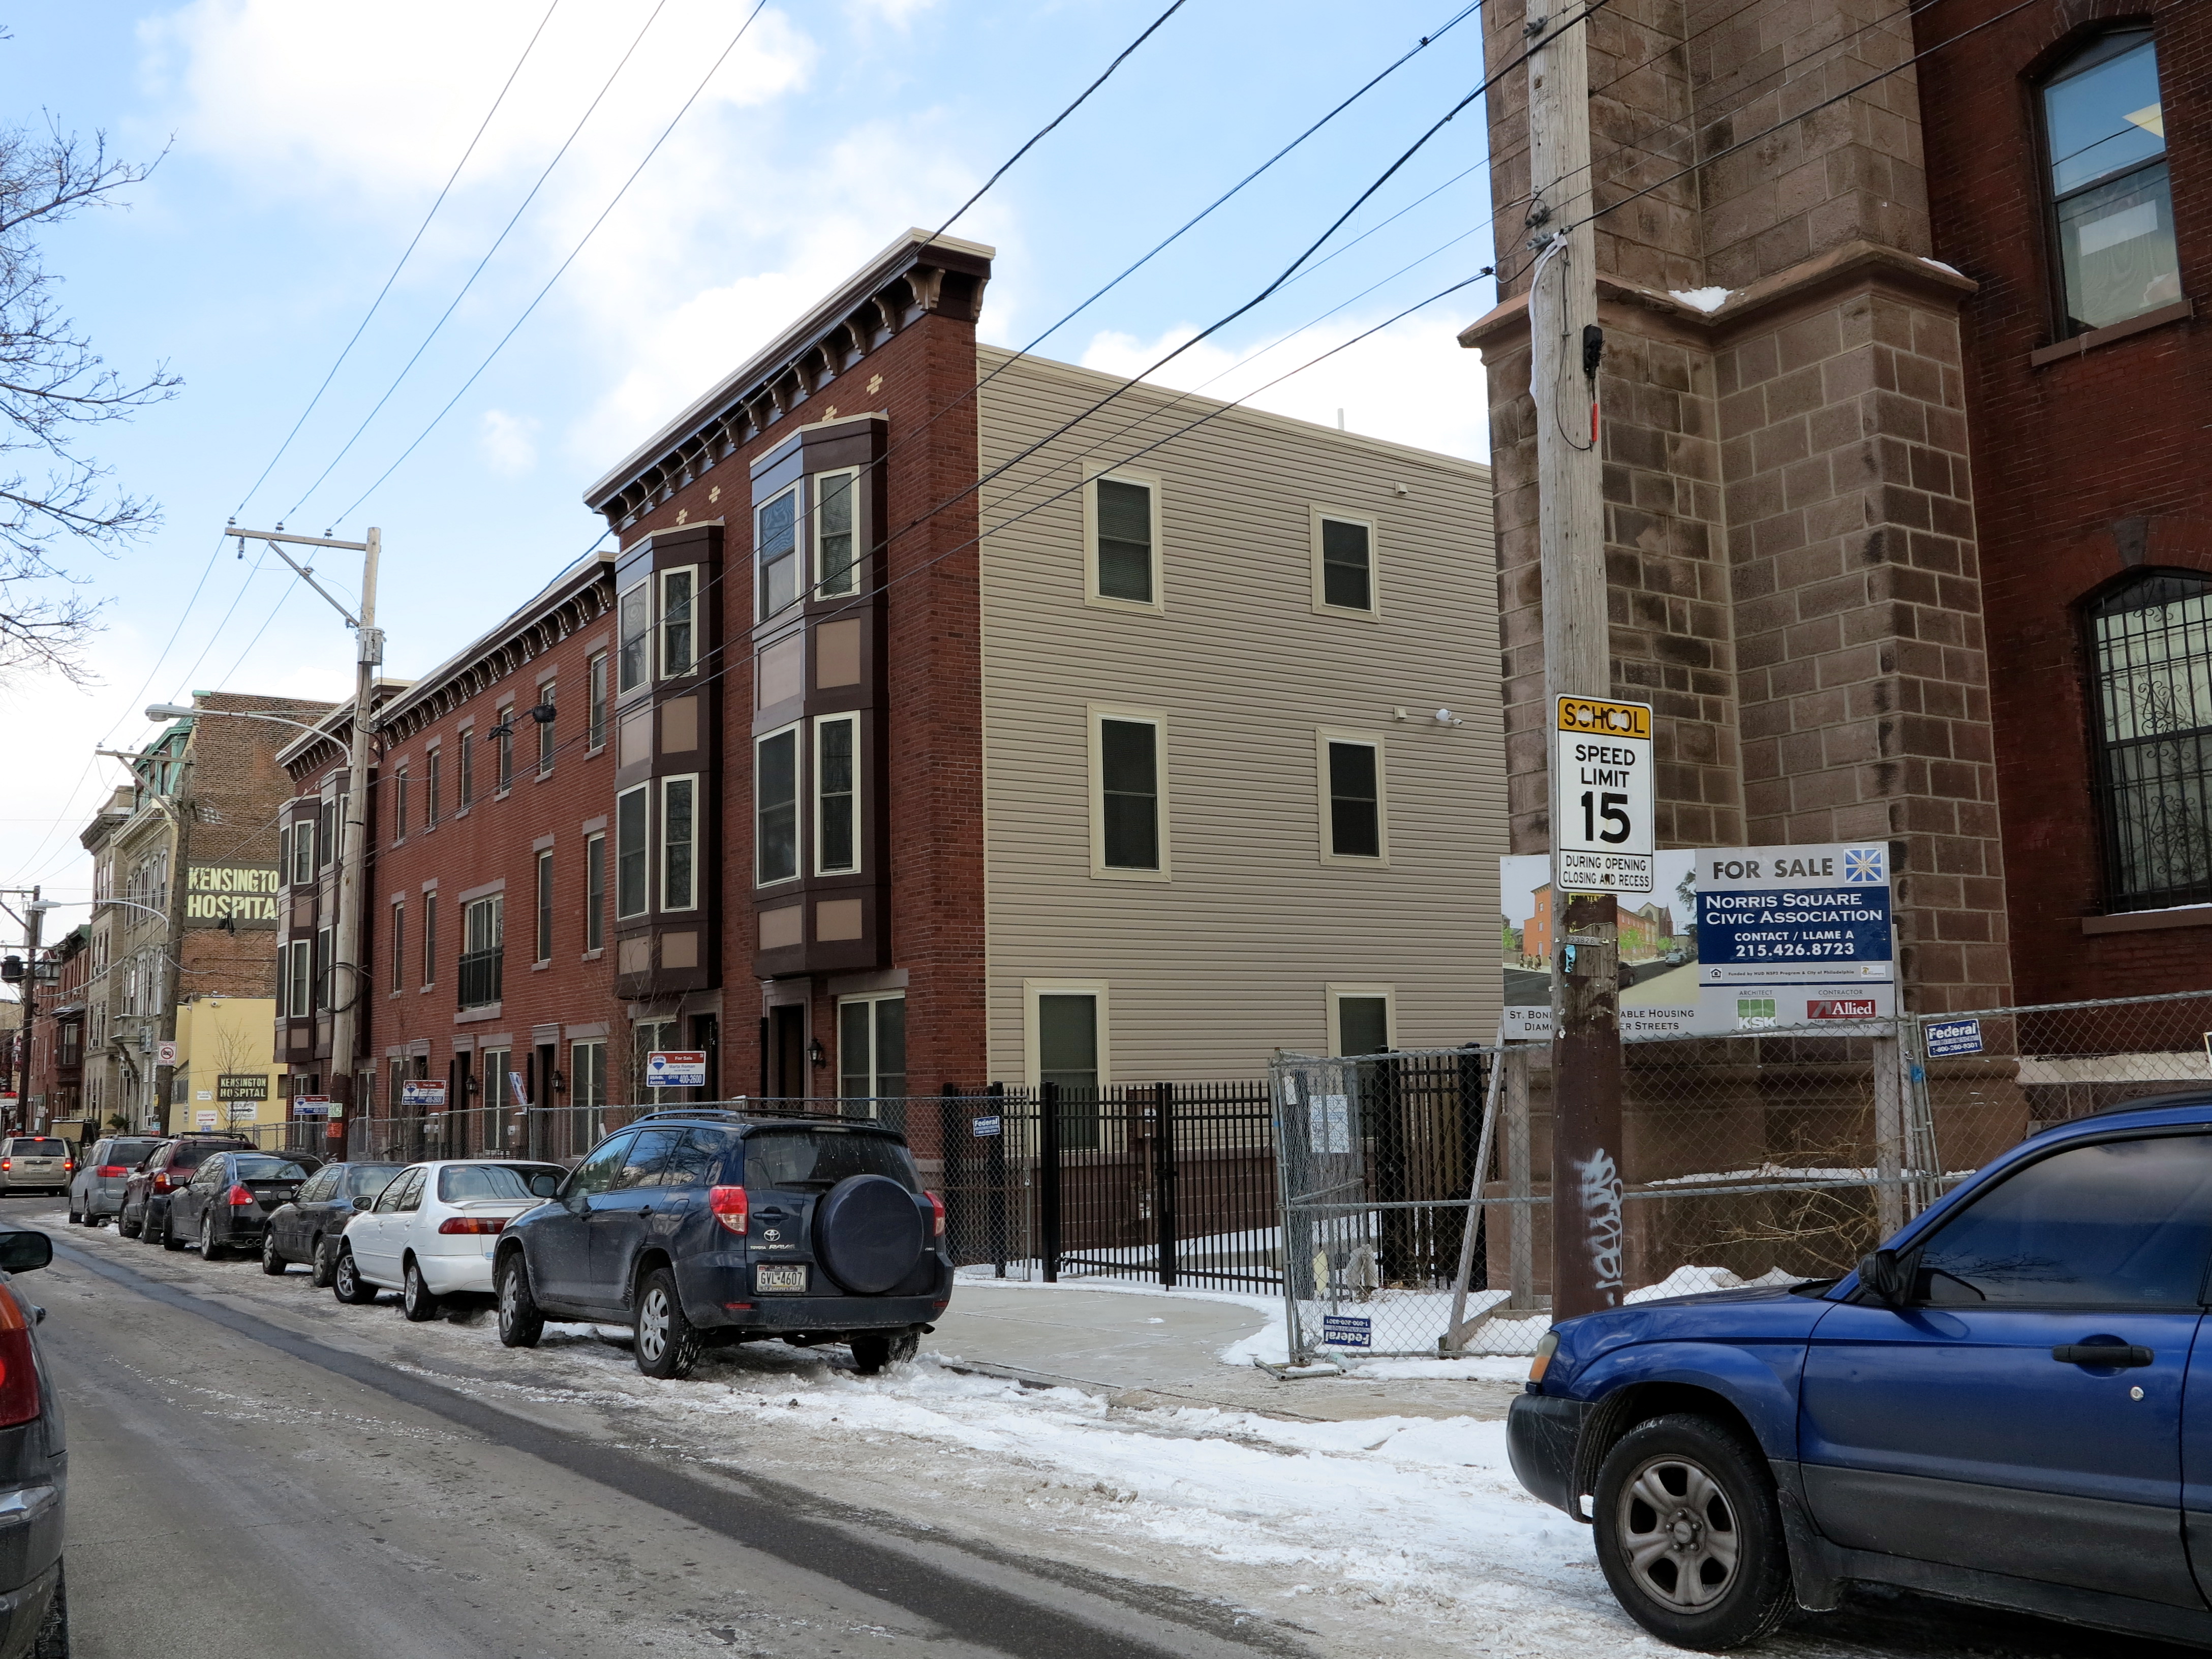 rowhouses that replaced St. Boniface church on Diamond Street